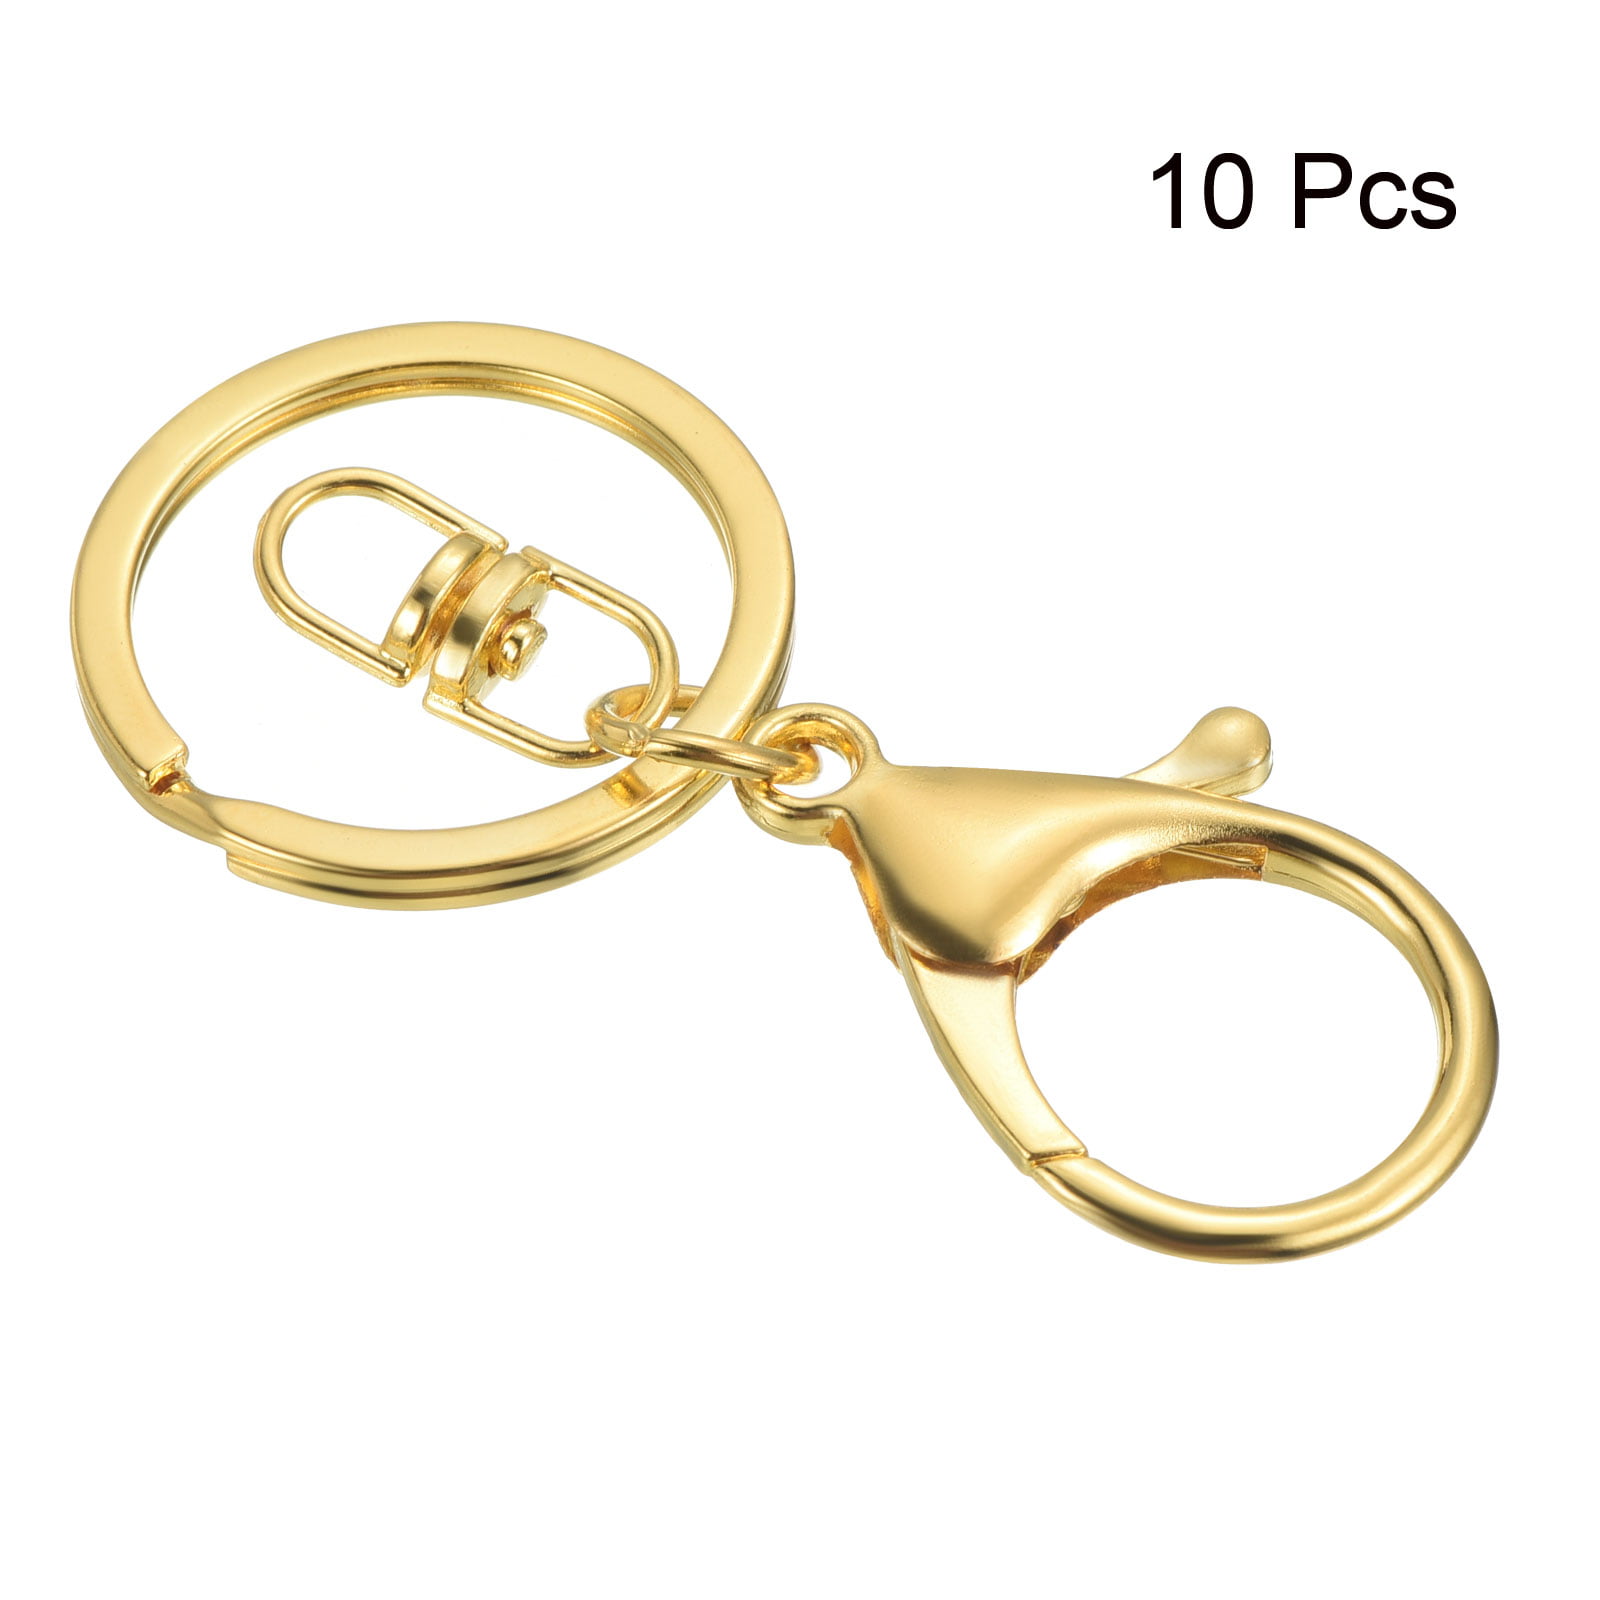 Honbay Pack of 20 Zinc Alloy Key Chain Ring with Lobster Clasps and  Extension Chain, Key Ring Loop Key Holders with Flat Split Ring and Chain  KC Gold